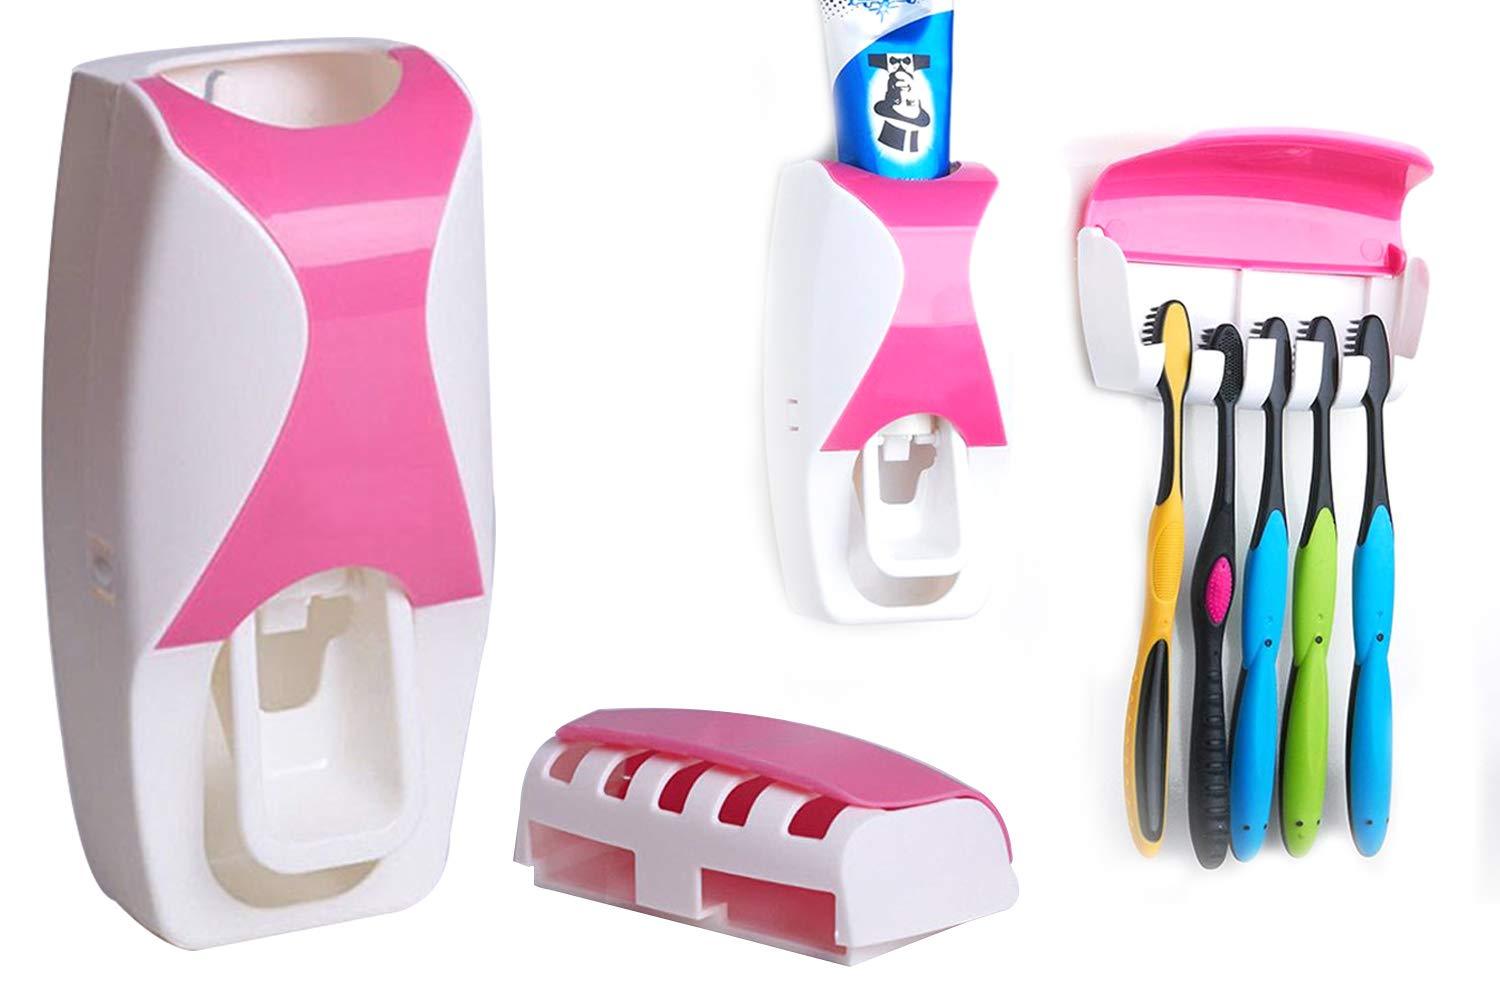 Toothpaste Dispenser & Tooth Brush with Toothbrush